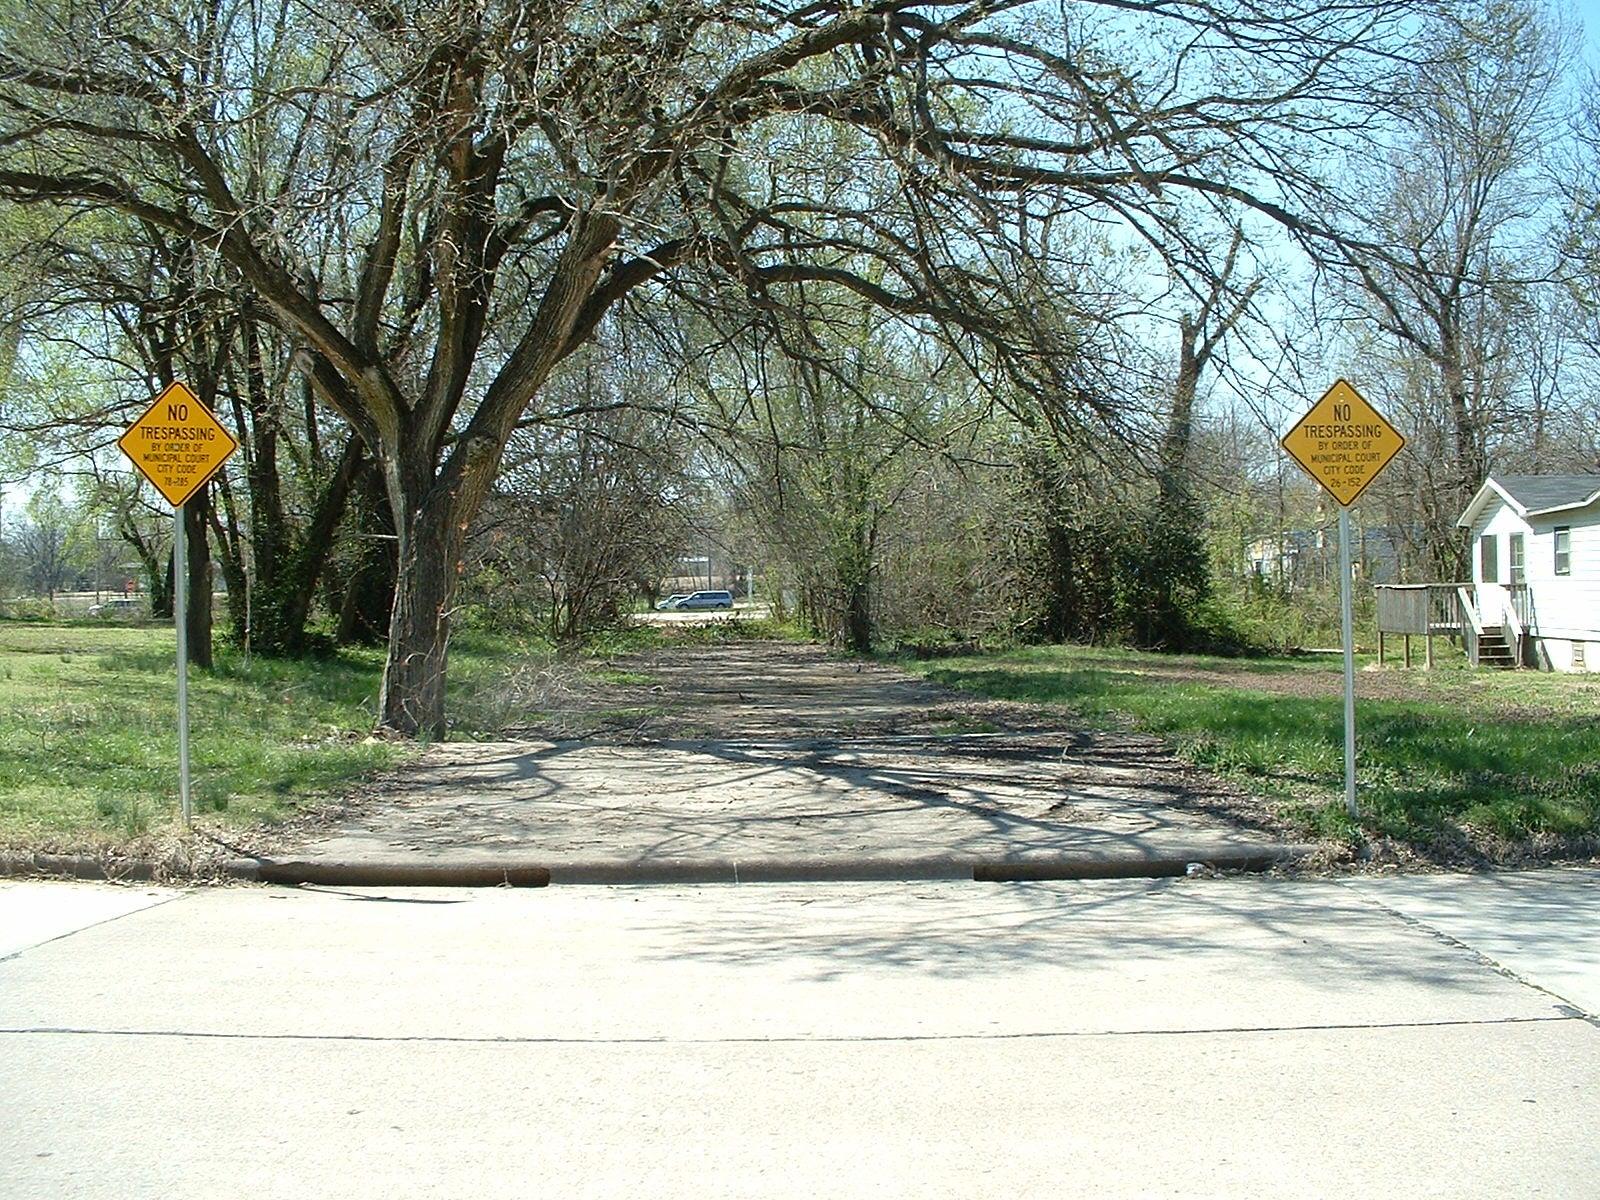 Paved street with trees and grass along it and a "no trespassing" sign on each side